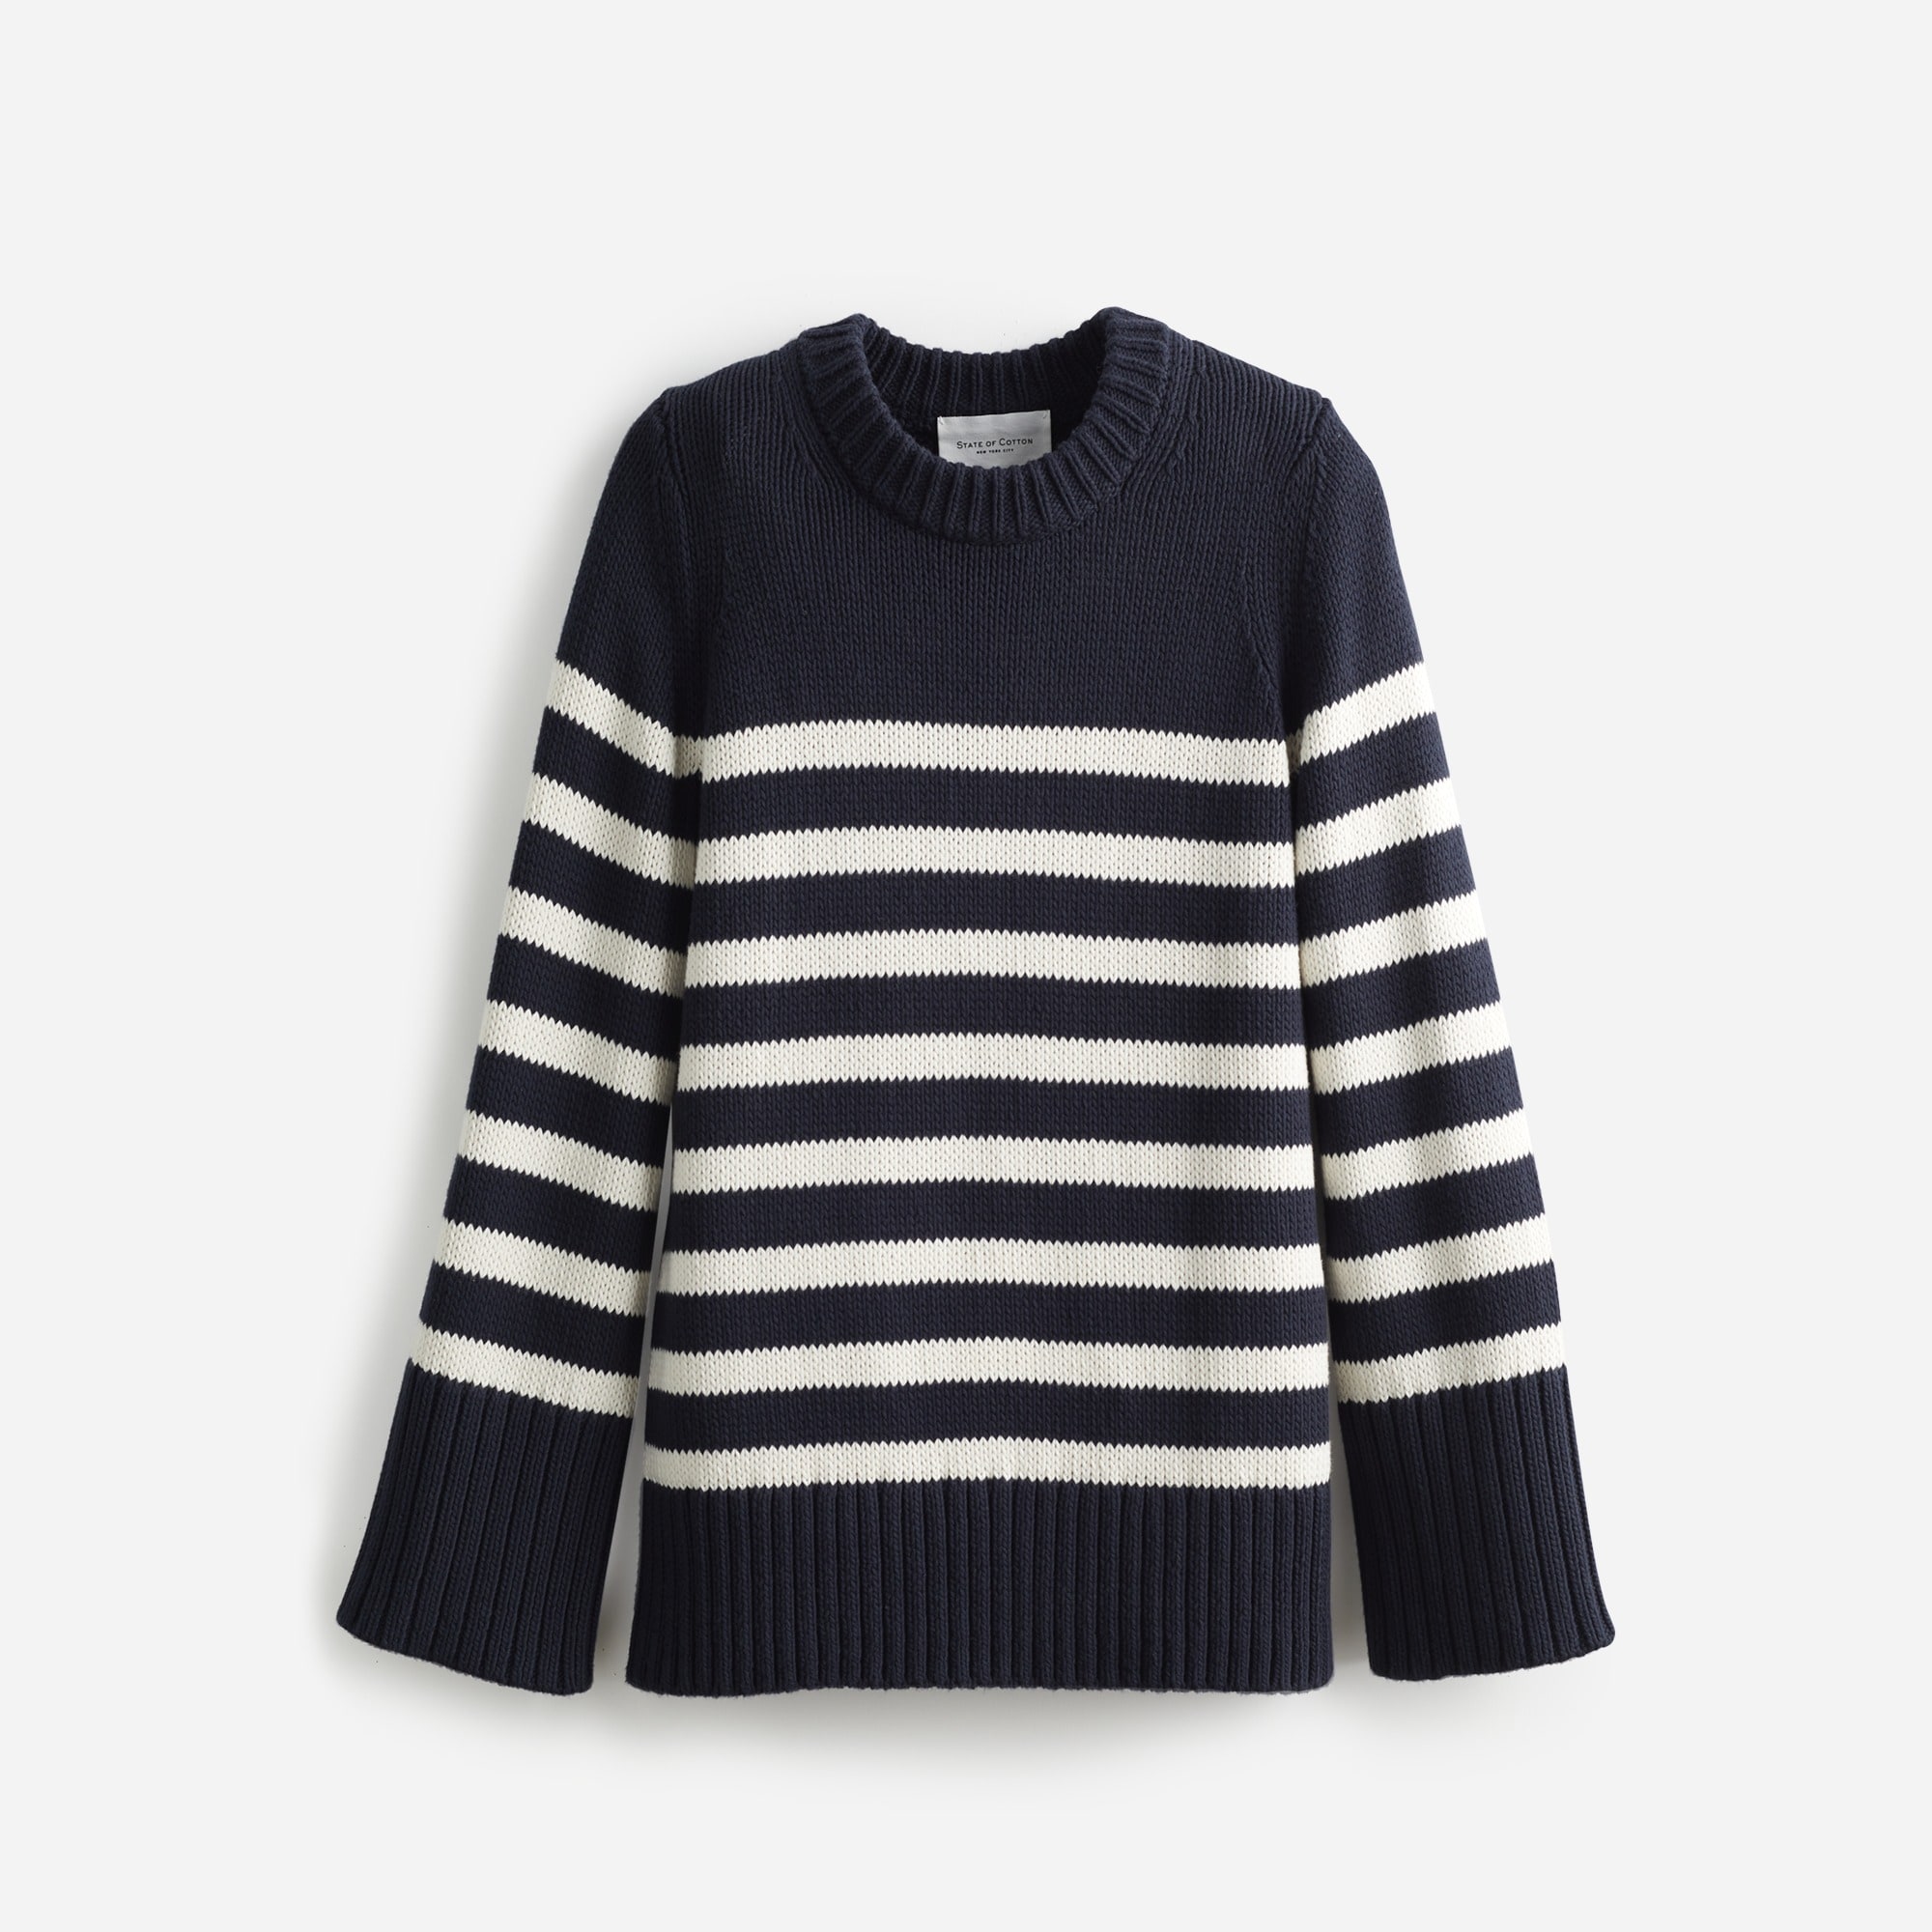 Jcrew State of Cotton NYC Kittery striped sweater